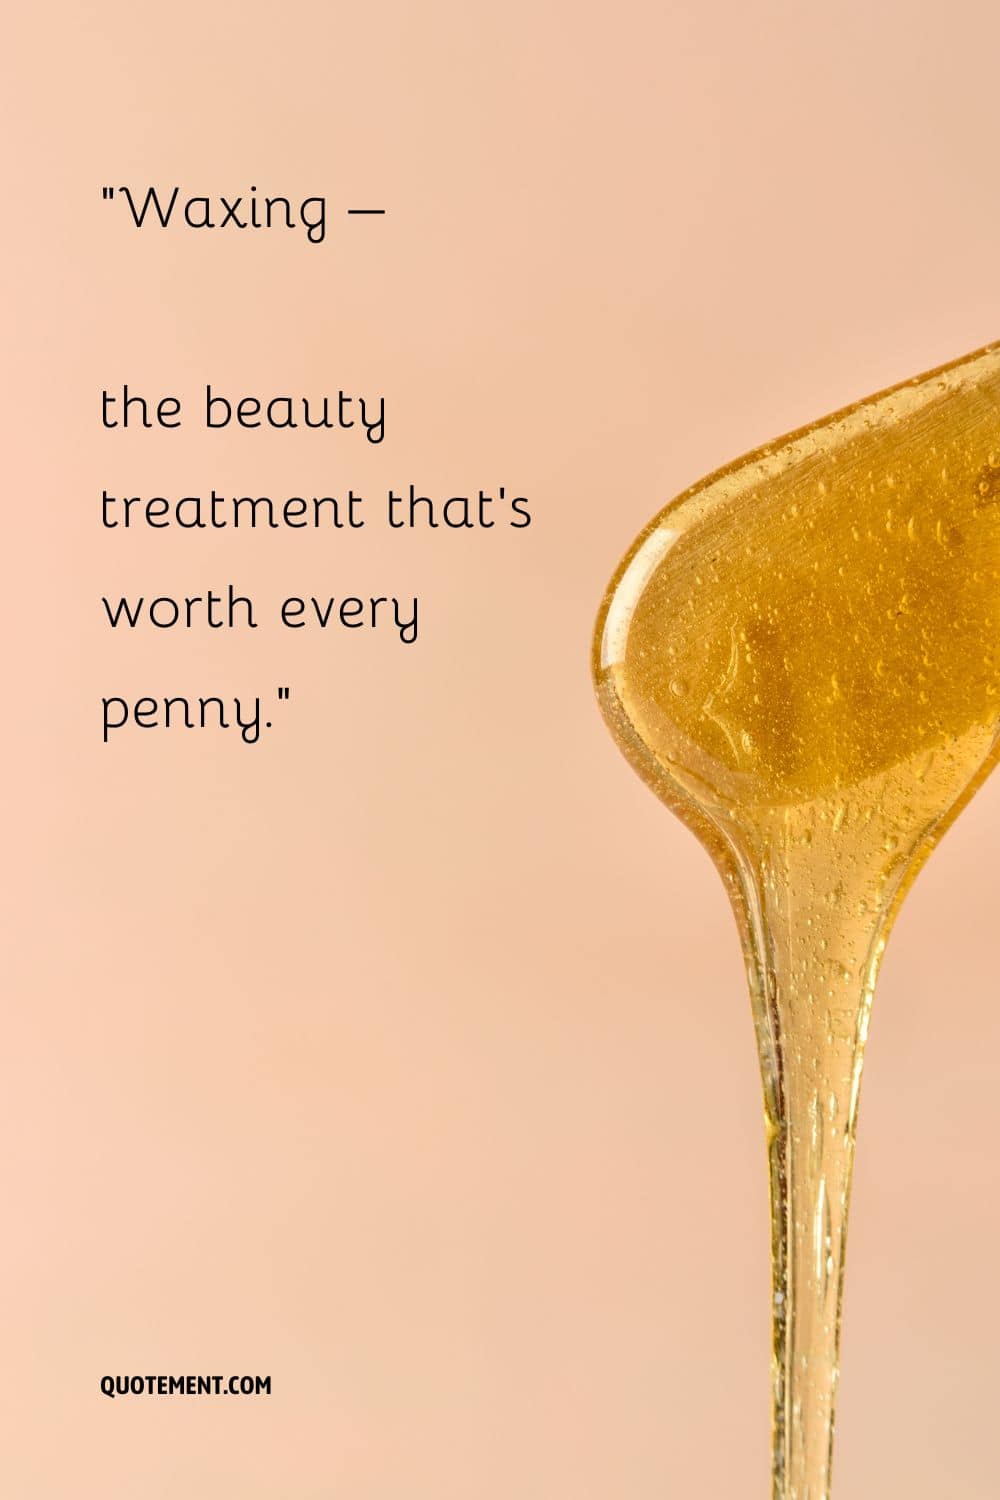 Waxing – the beauty treatment that’s worth every penny.